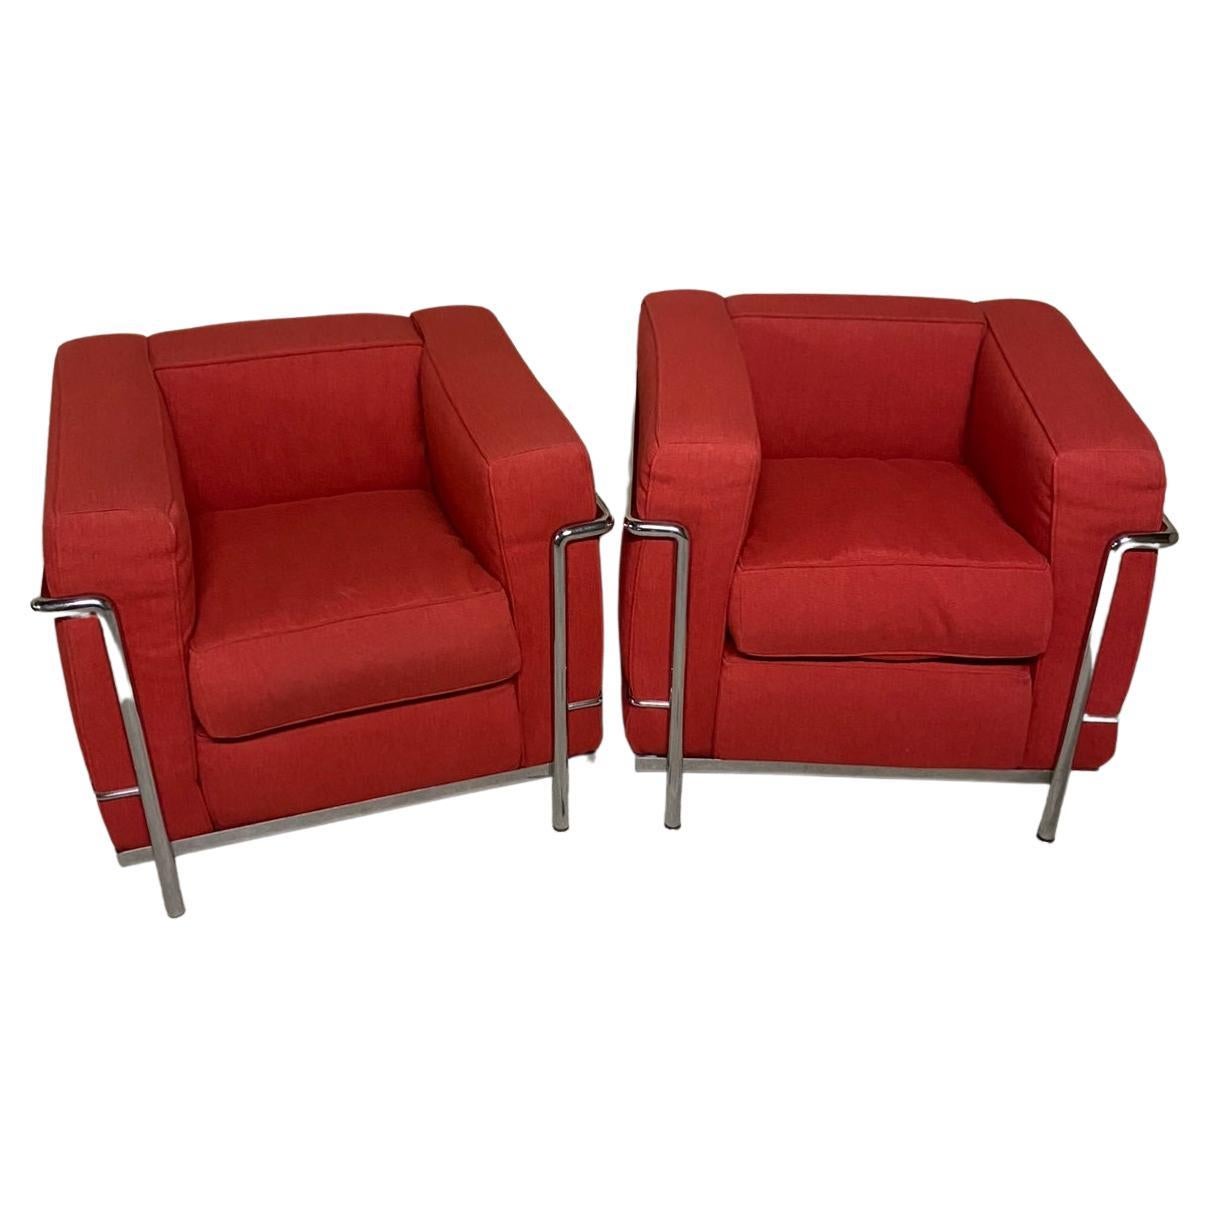 LC2 armchairs designed by Le Corbusier Made by Cassina